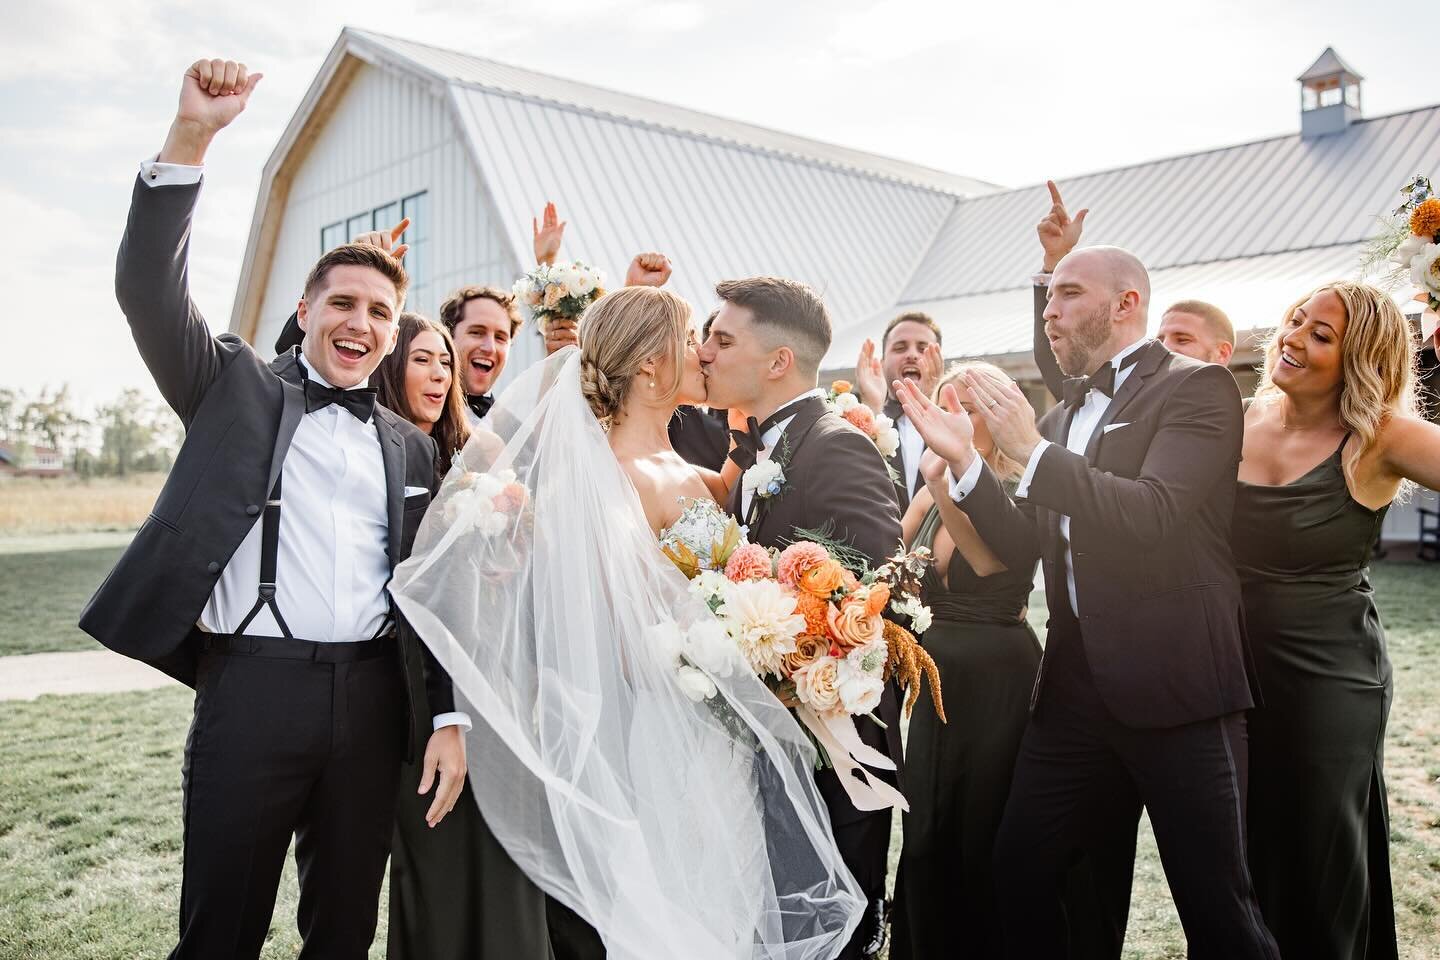 Searching for the perfect setting for your wedding weekend, prep, ceremony, cocktail hour and reception? Reserve your 2024/2025 date at Northern Haus today - recently named &quot;Best WI Destination Venue&quot; by Wisconsin Bride.
*
*
* 

Photography